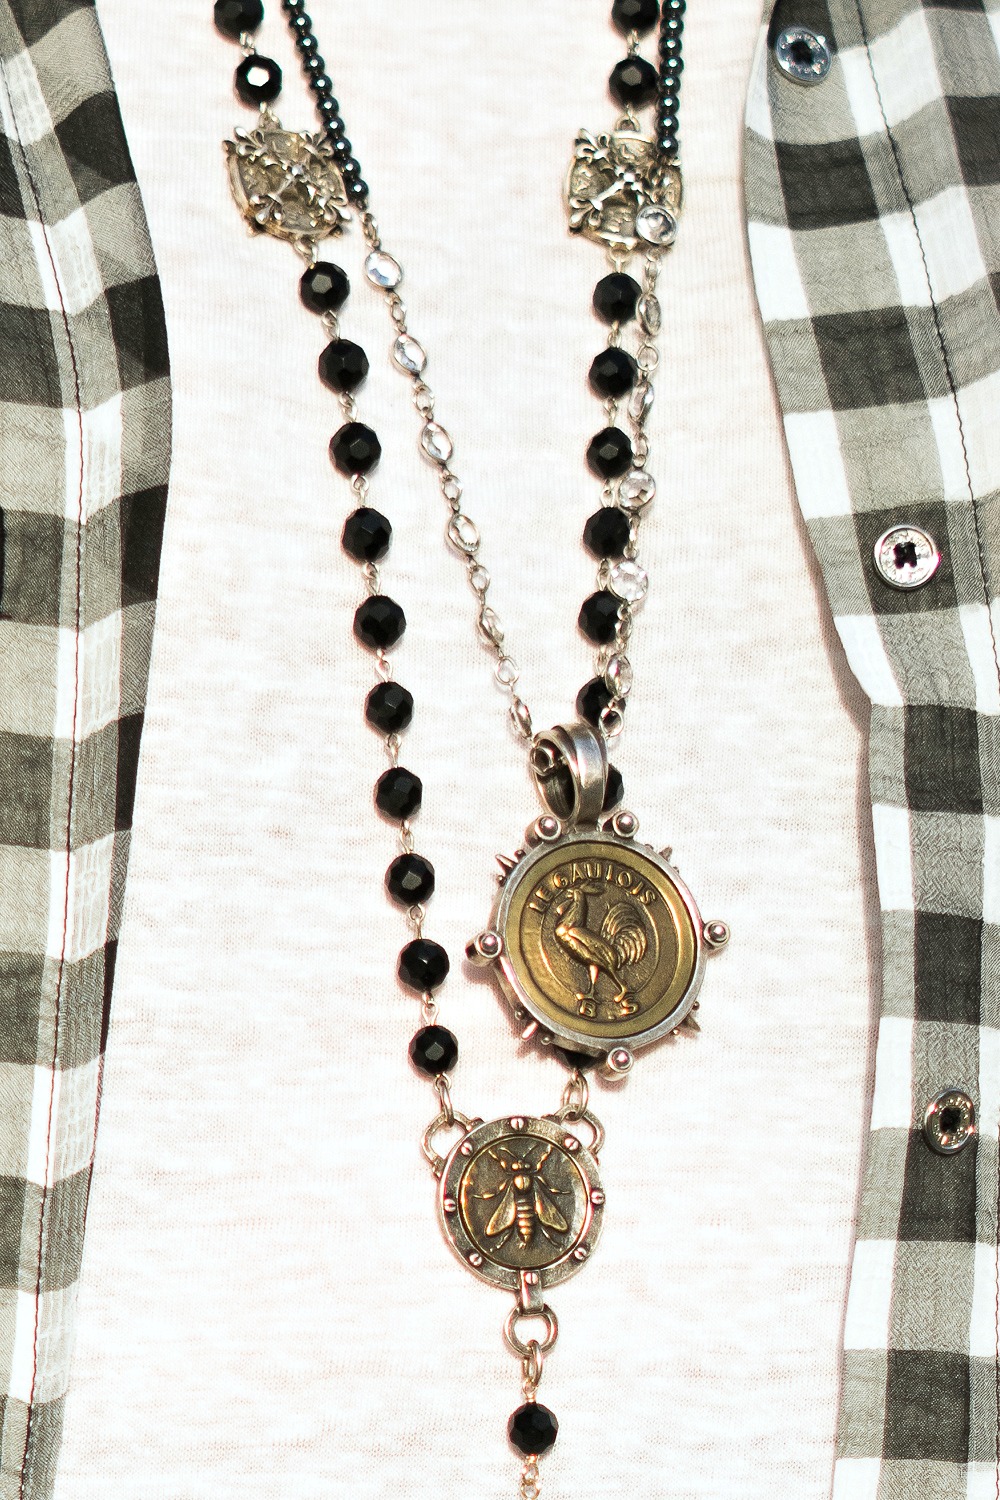 Details: French Kande jewelry with vintage French medallions. Details at une femme d'un certain age.